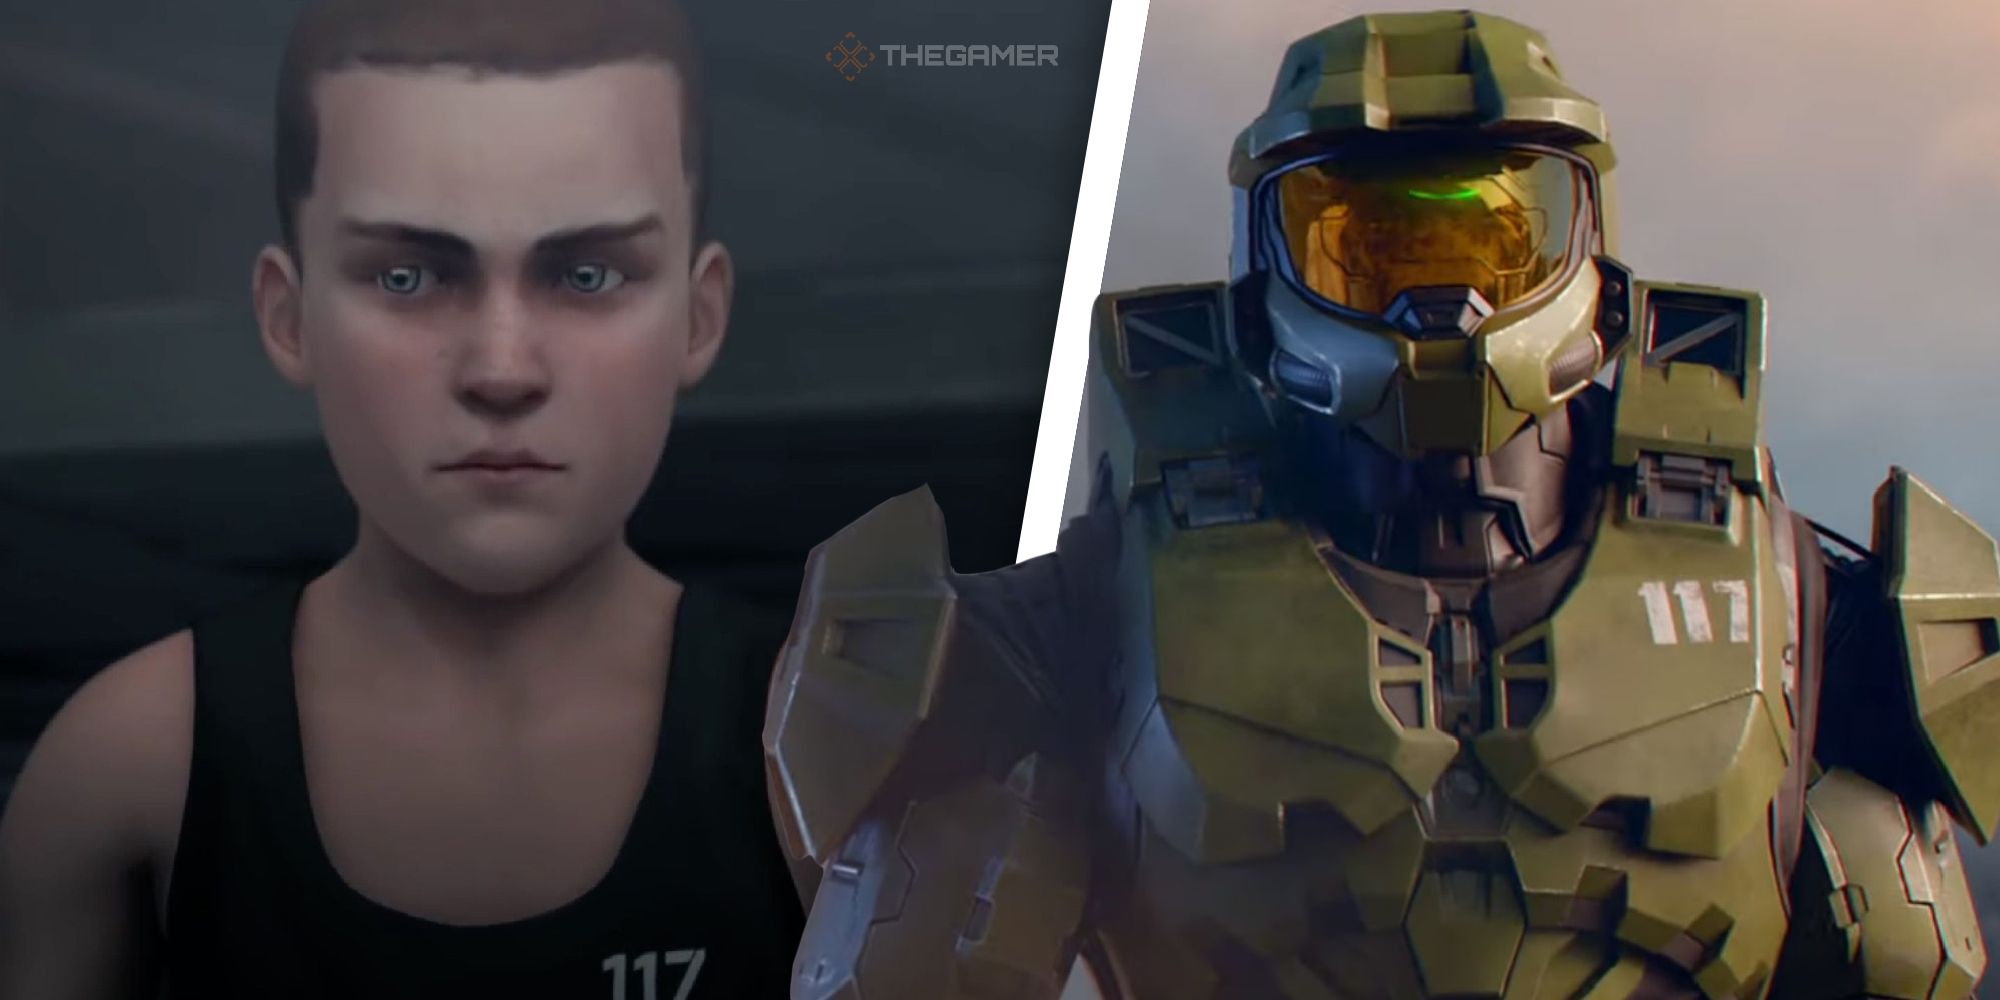 Halo Master Chief Face Reveal